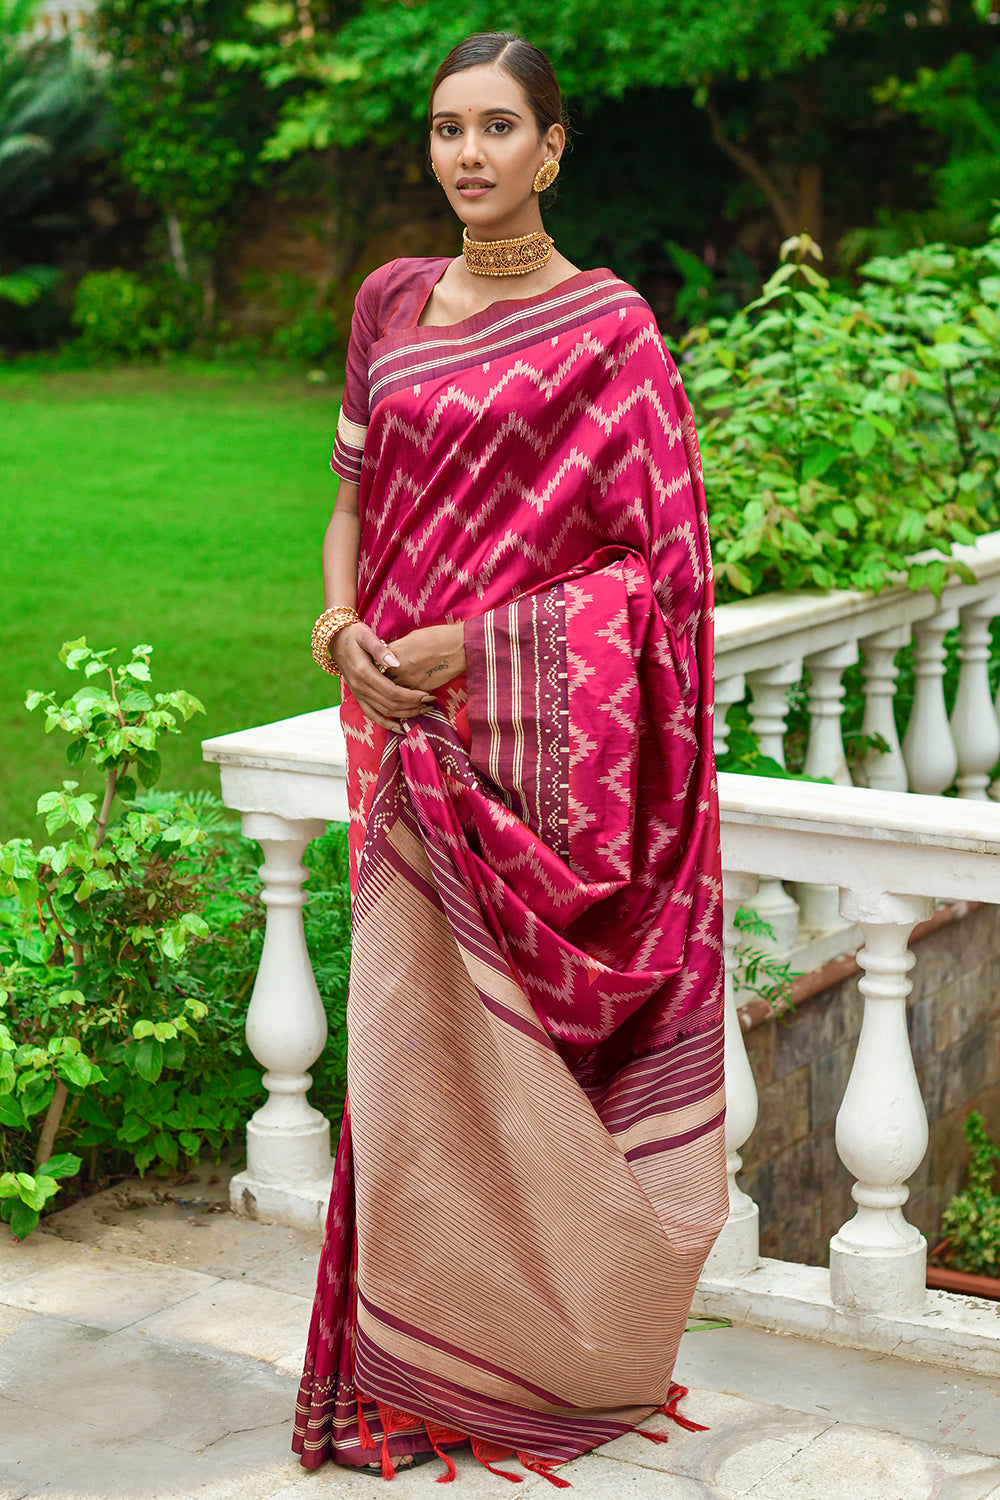 The Significance of Colors in Sarees and Their Cultural Meaning - Sanskriti  Cuttack